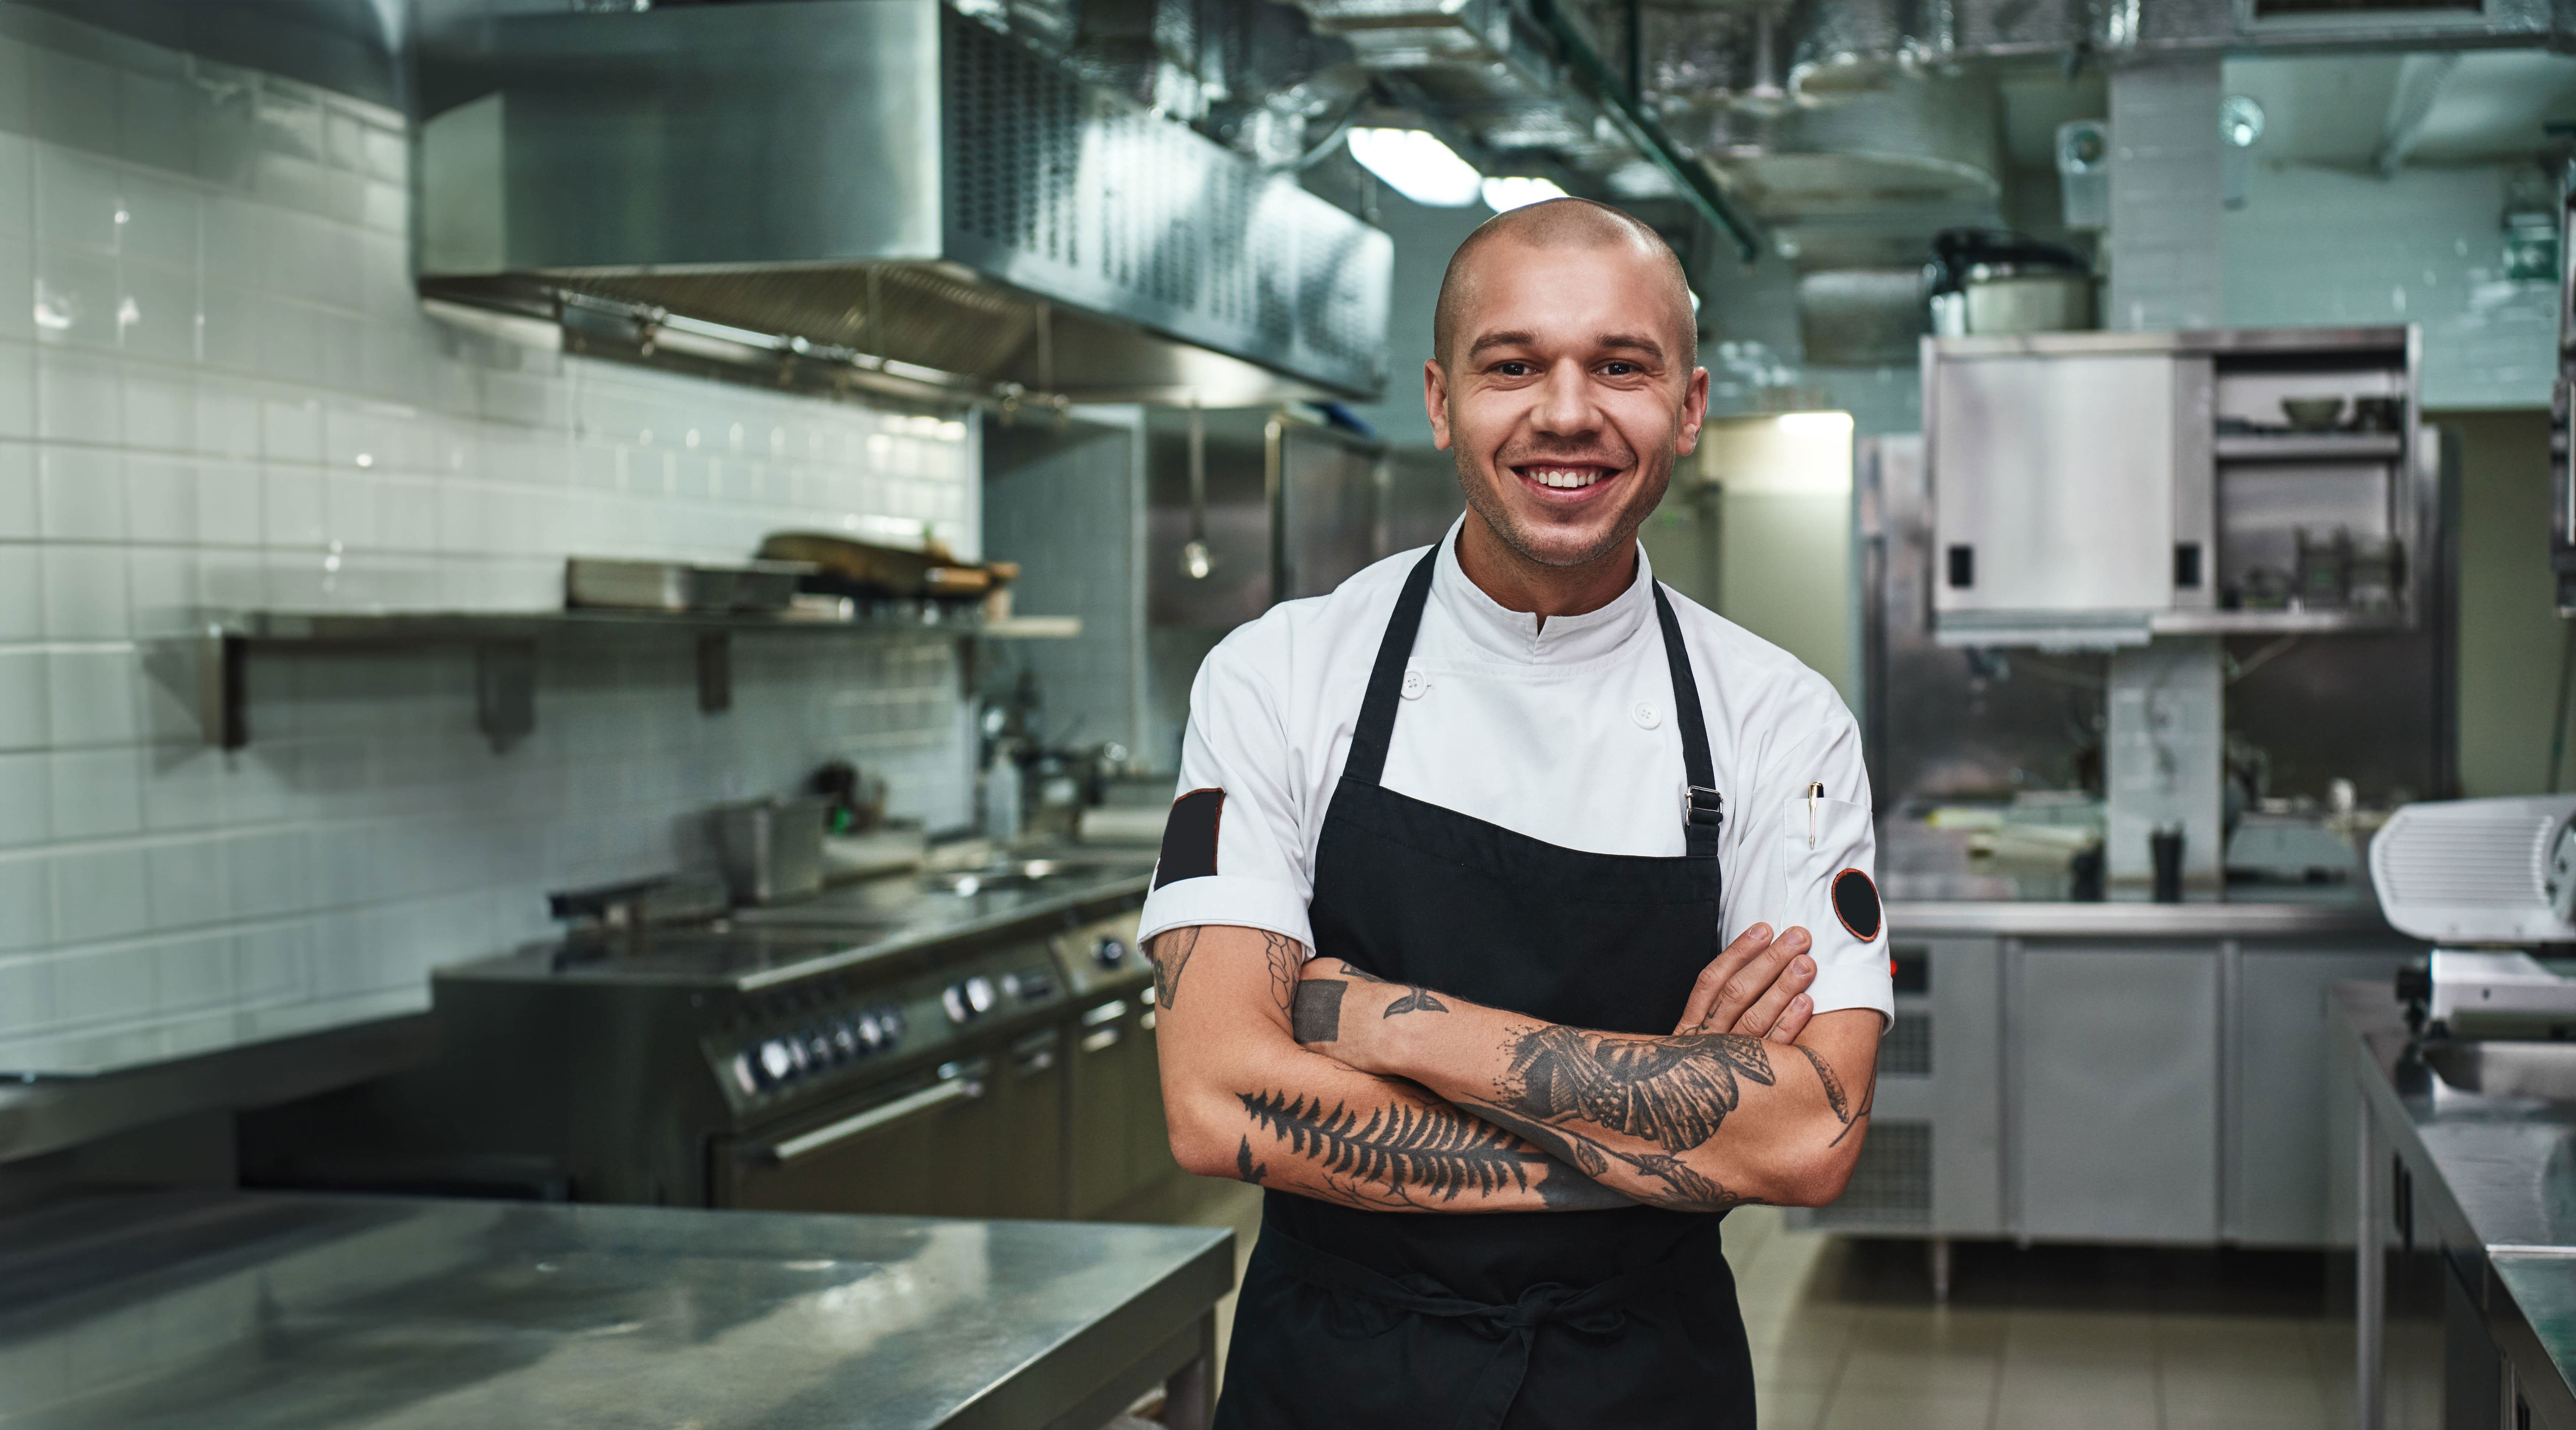 Top tips for progressing your career in Hospitality